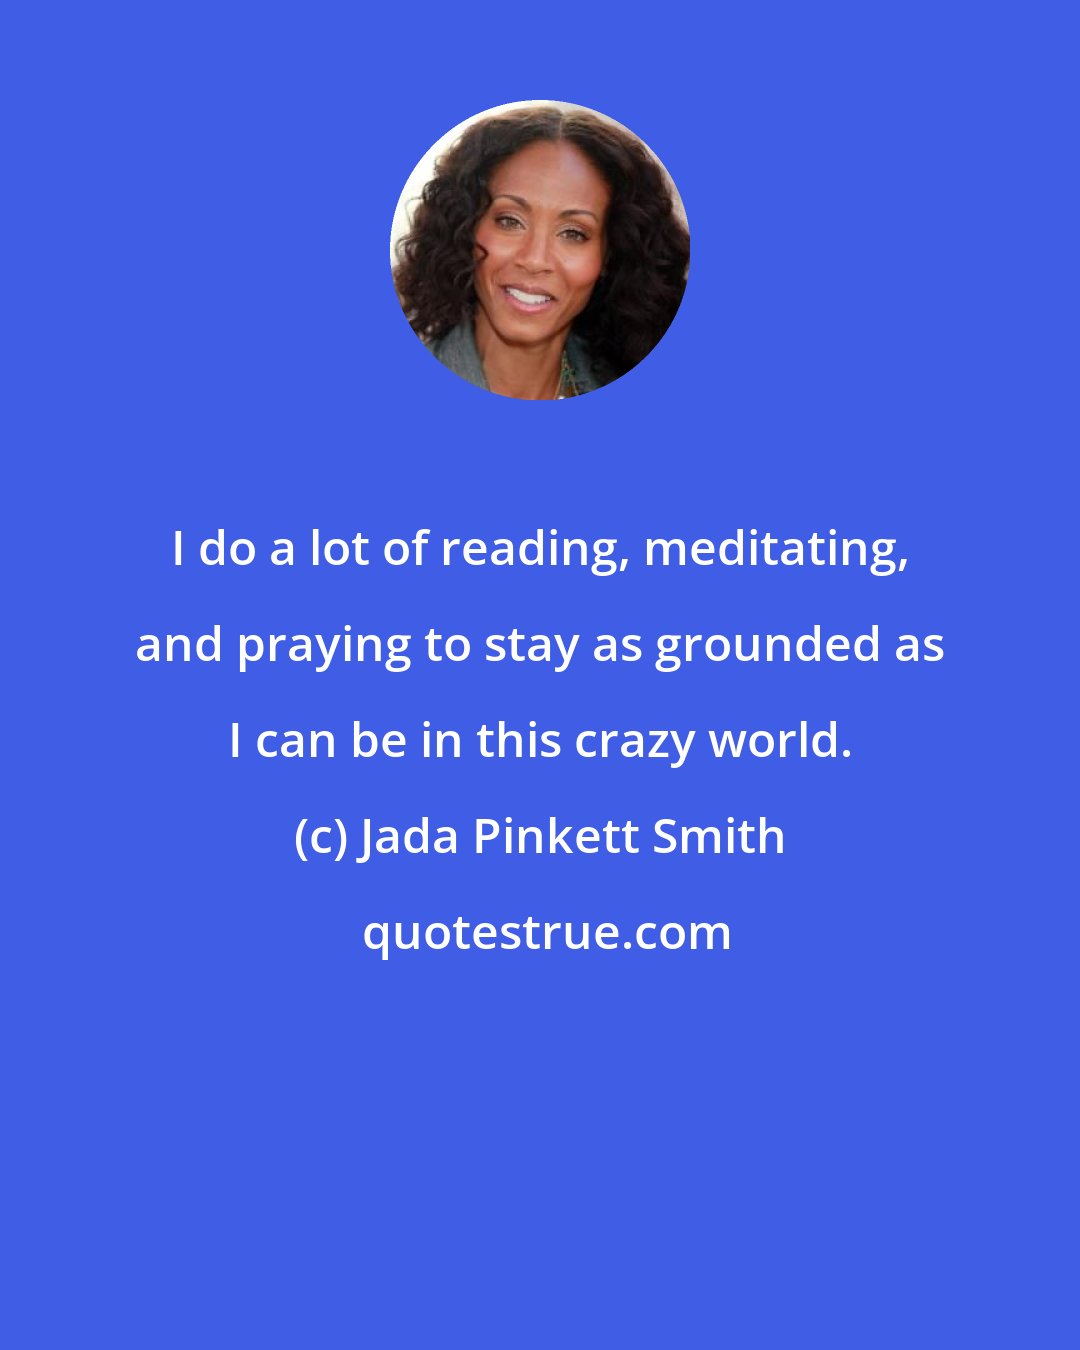 Jada Pinkett Smith: I do a lot of reading, meditating, and praying to stay as grounded as I can be in this crazy world.